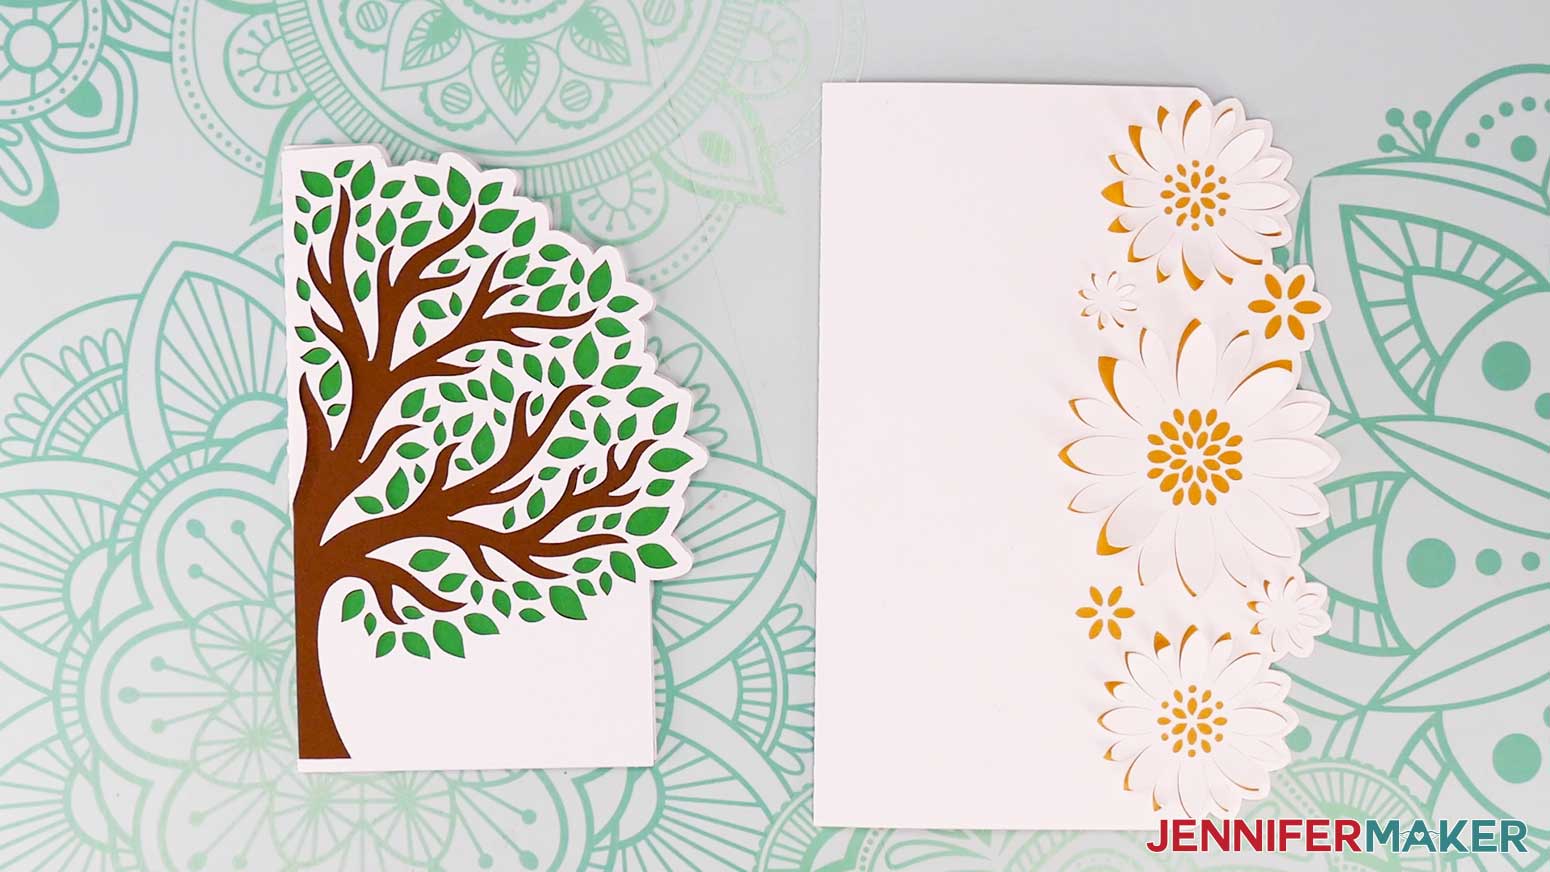 The finished Joy-size tree and 5 inch by 7 inch flower shaped edge cards assembled and folded on a work surface